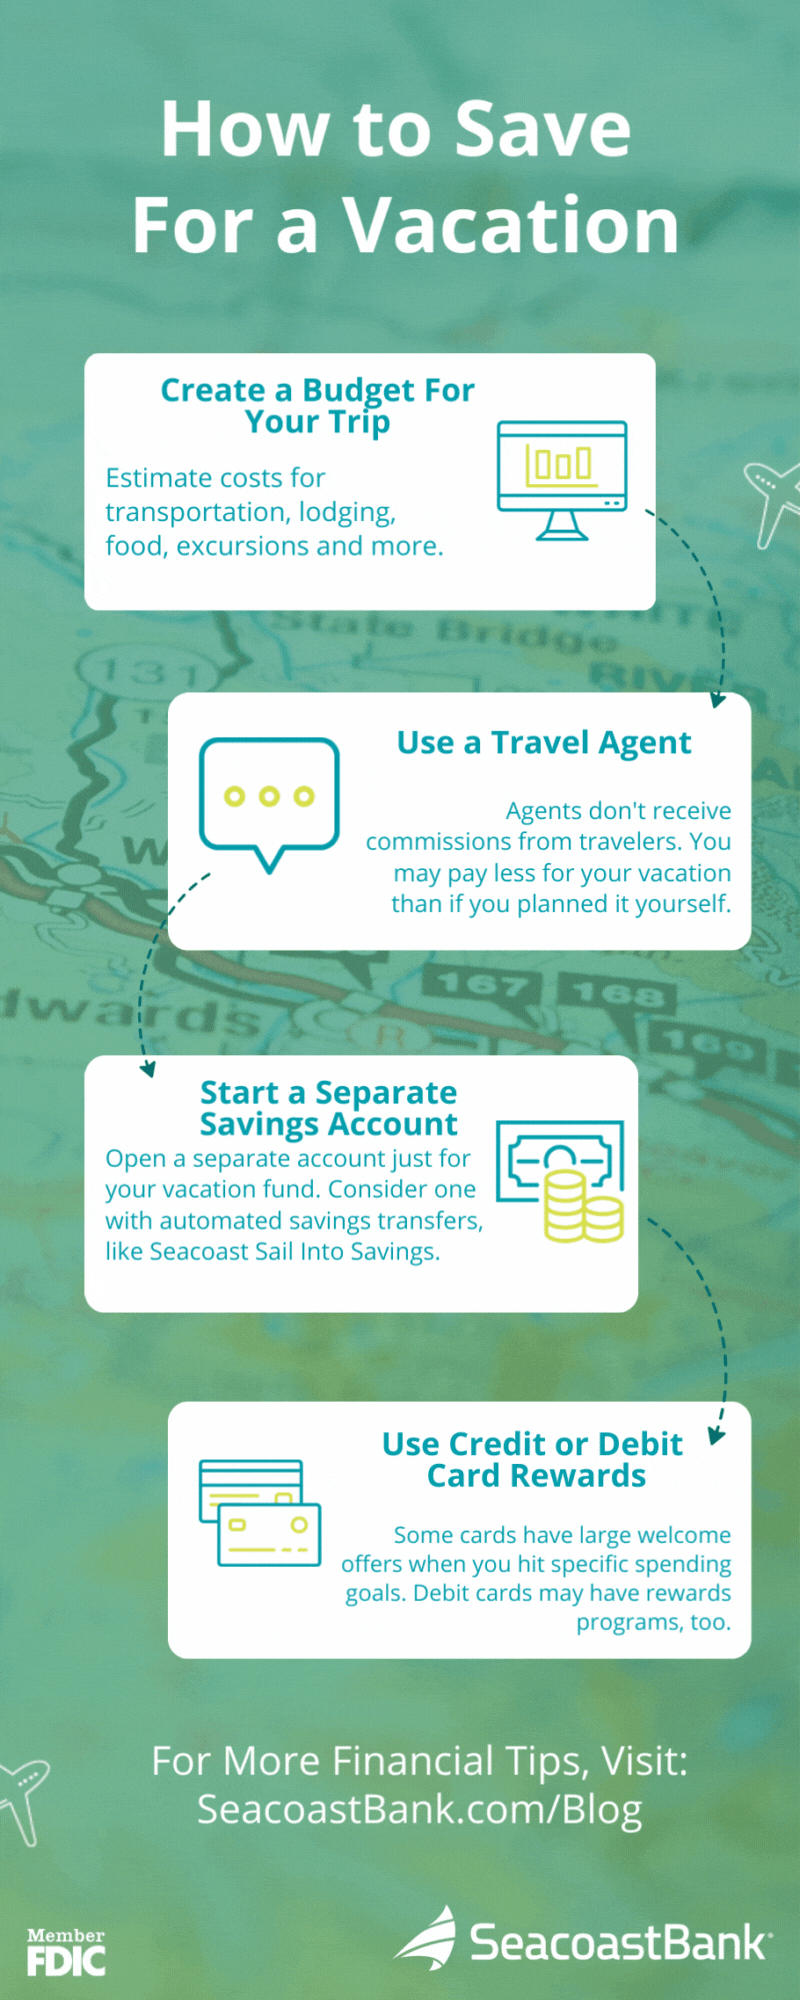 How to Save For a Vacation Infographic (9)